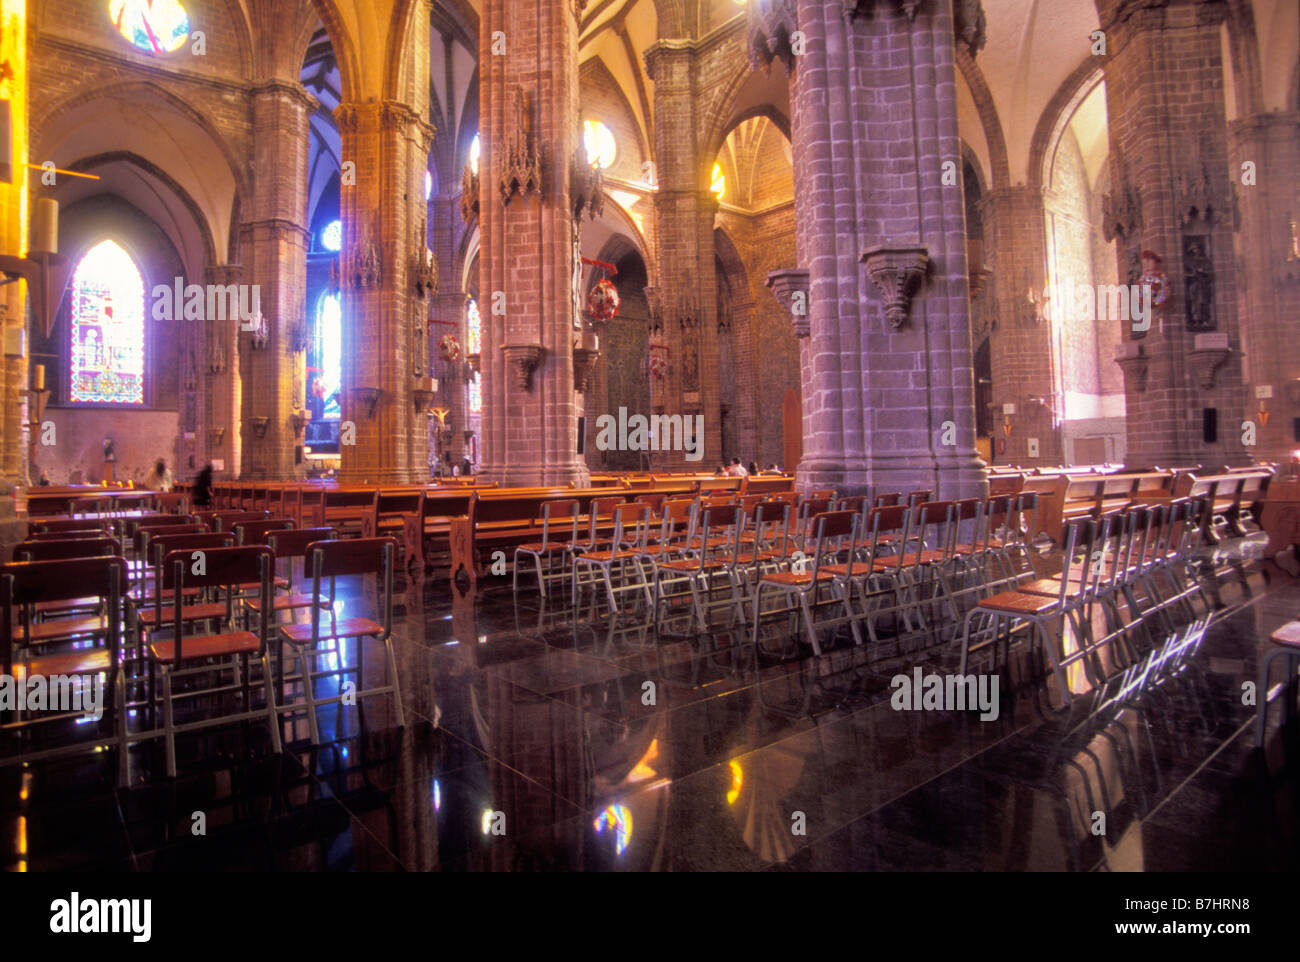 Interior of Our Lady of Guadalupe Cathedral in Zamora Michoacan Mexico Stock Photo